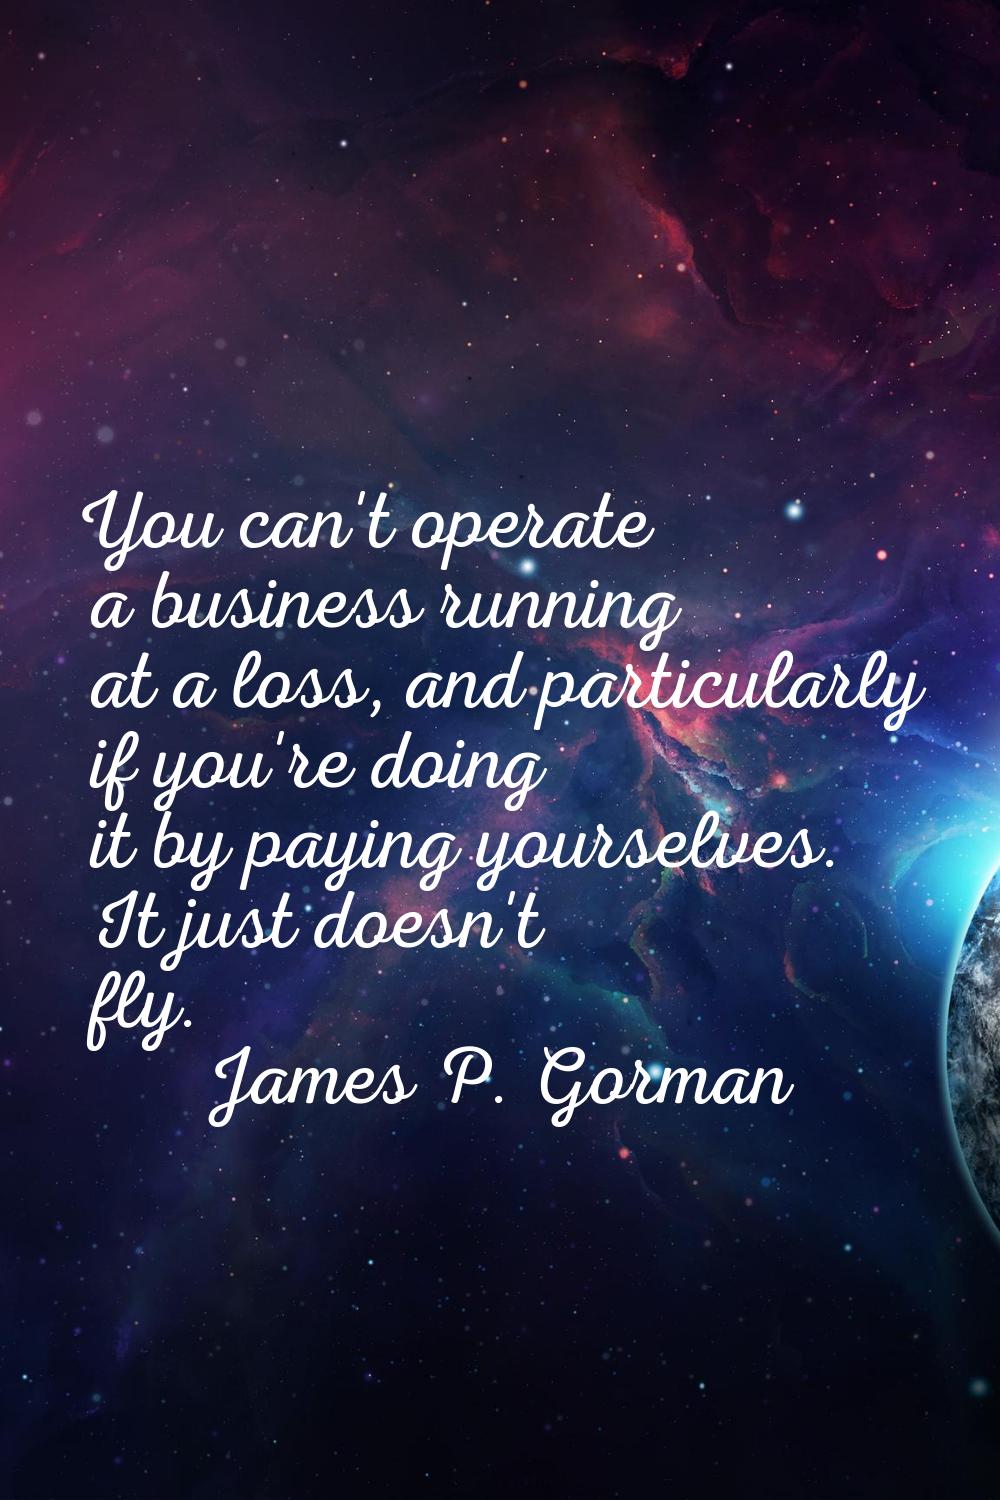 You can't operate a business running at a loss, and particularly if you're doing it by paying yours